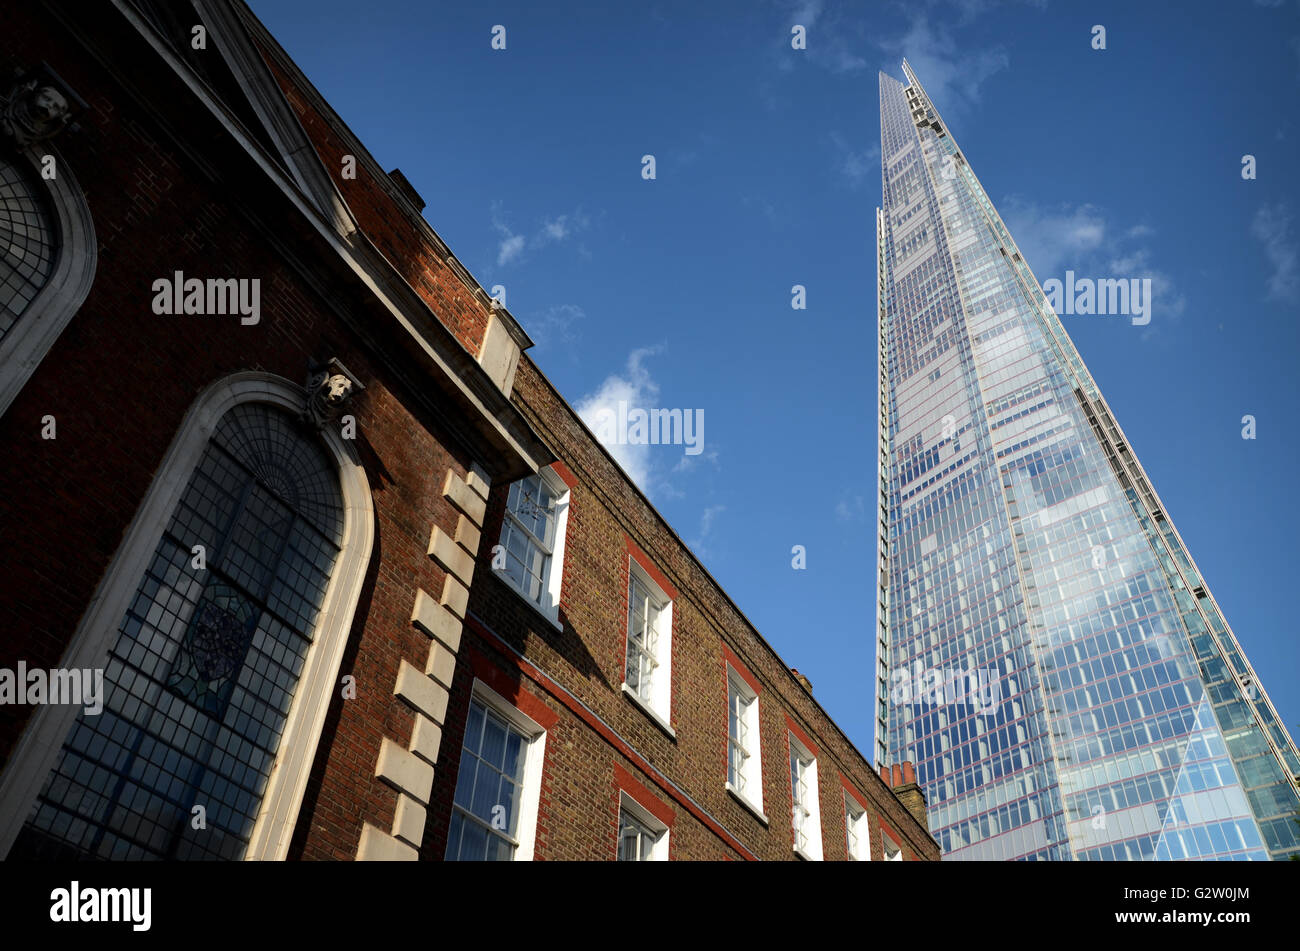 Contrast between old and new architecture in London, with the majestic Shard placed next to a quaint old brick building. Stock Photo